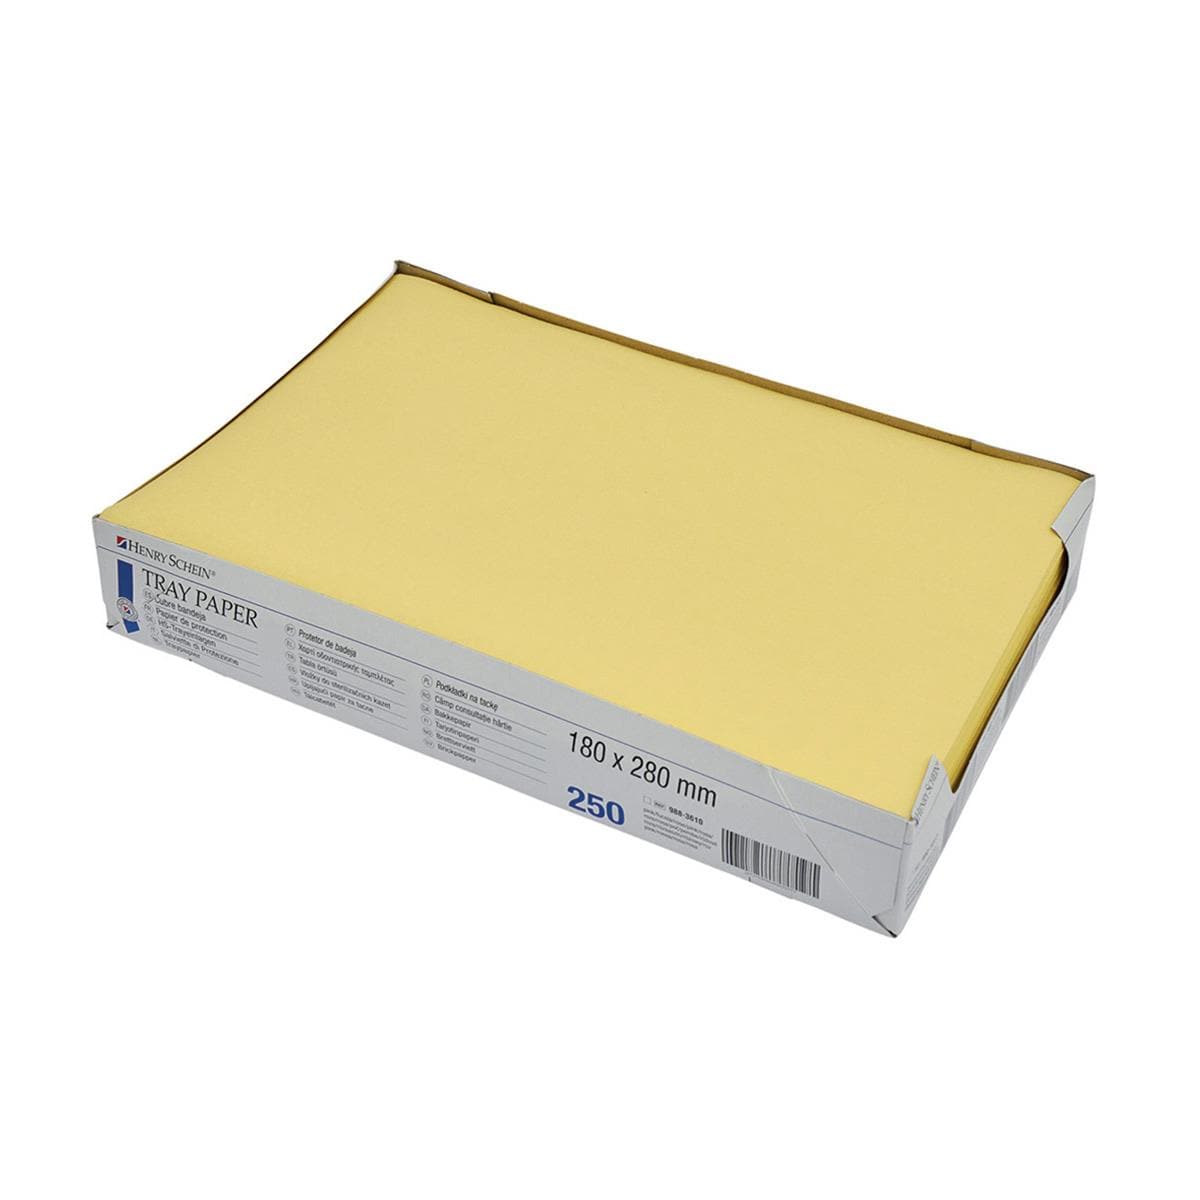 HS Tray Paper Yellow 180 x 280mm 250pk